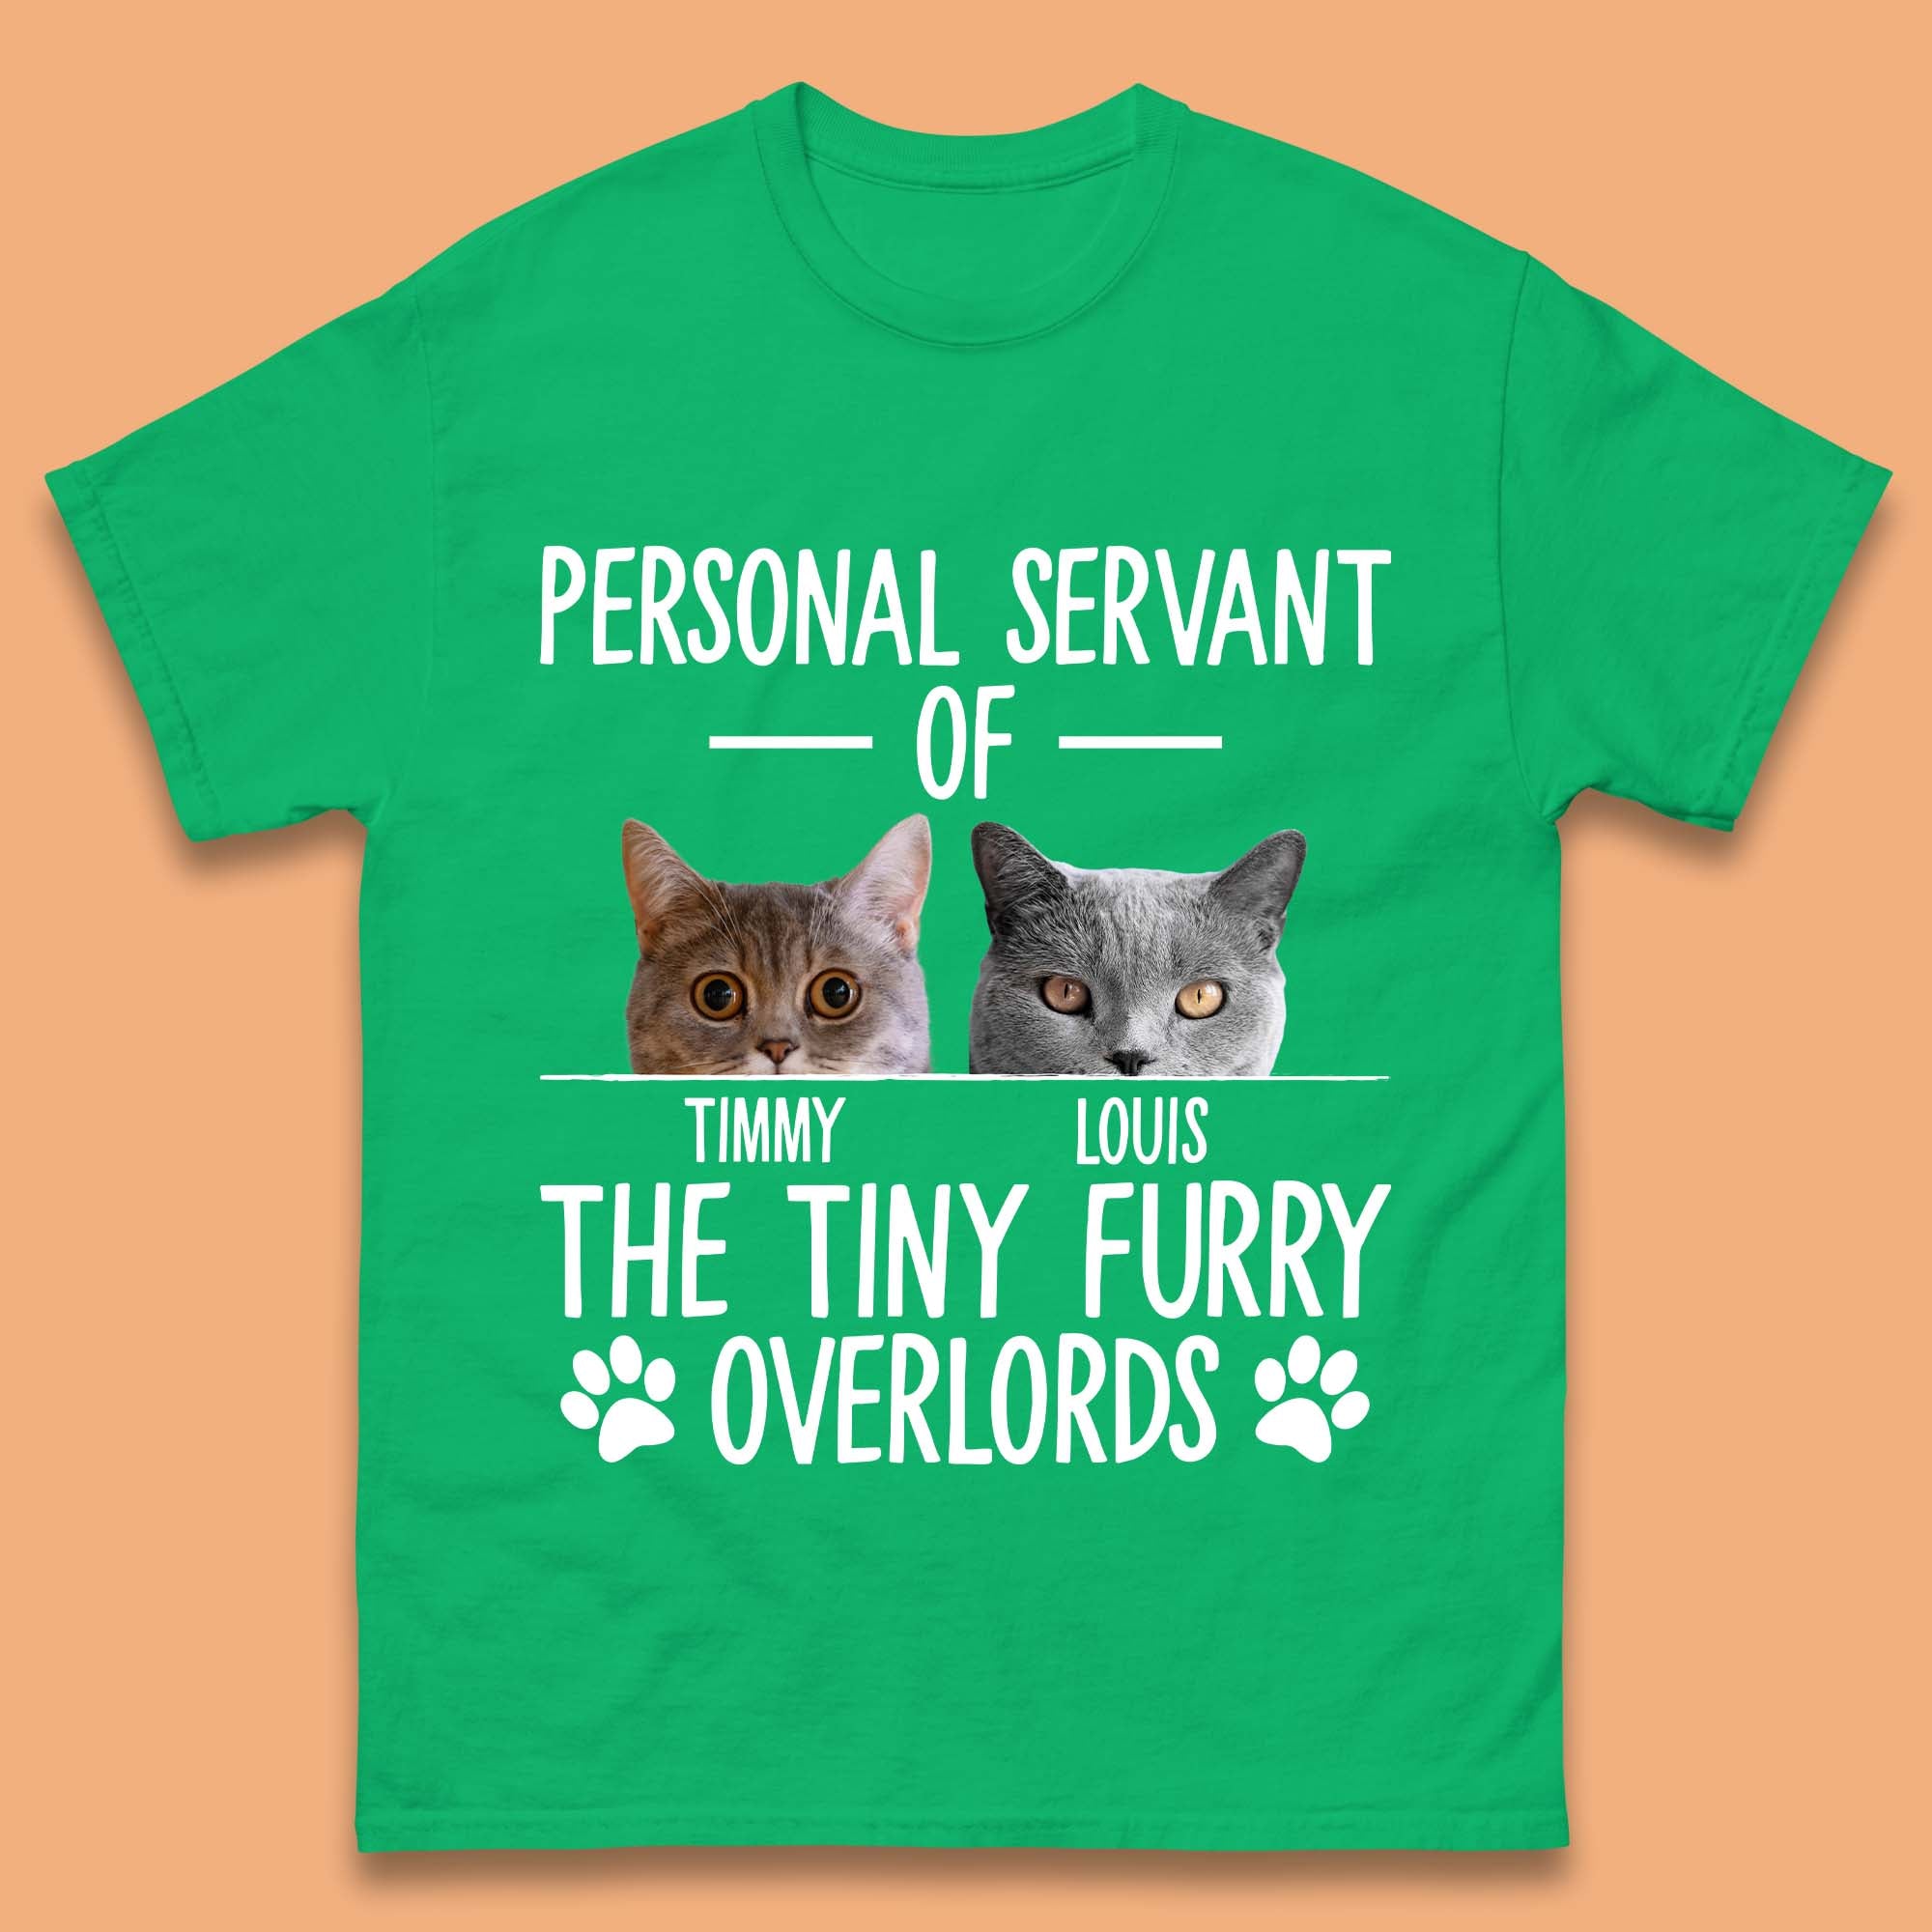 Personalised Servant Of The Tiny Furry Overlords Mens T-Shirt